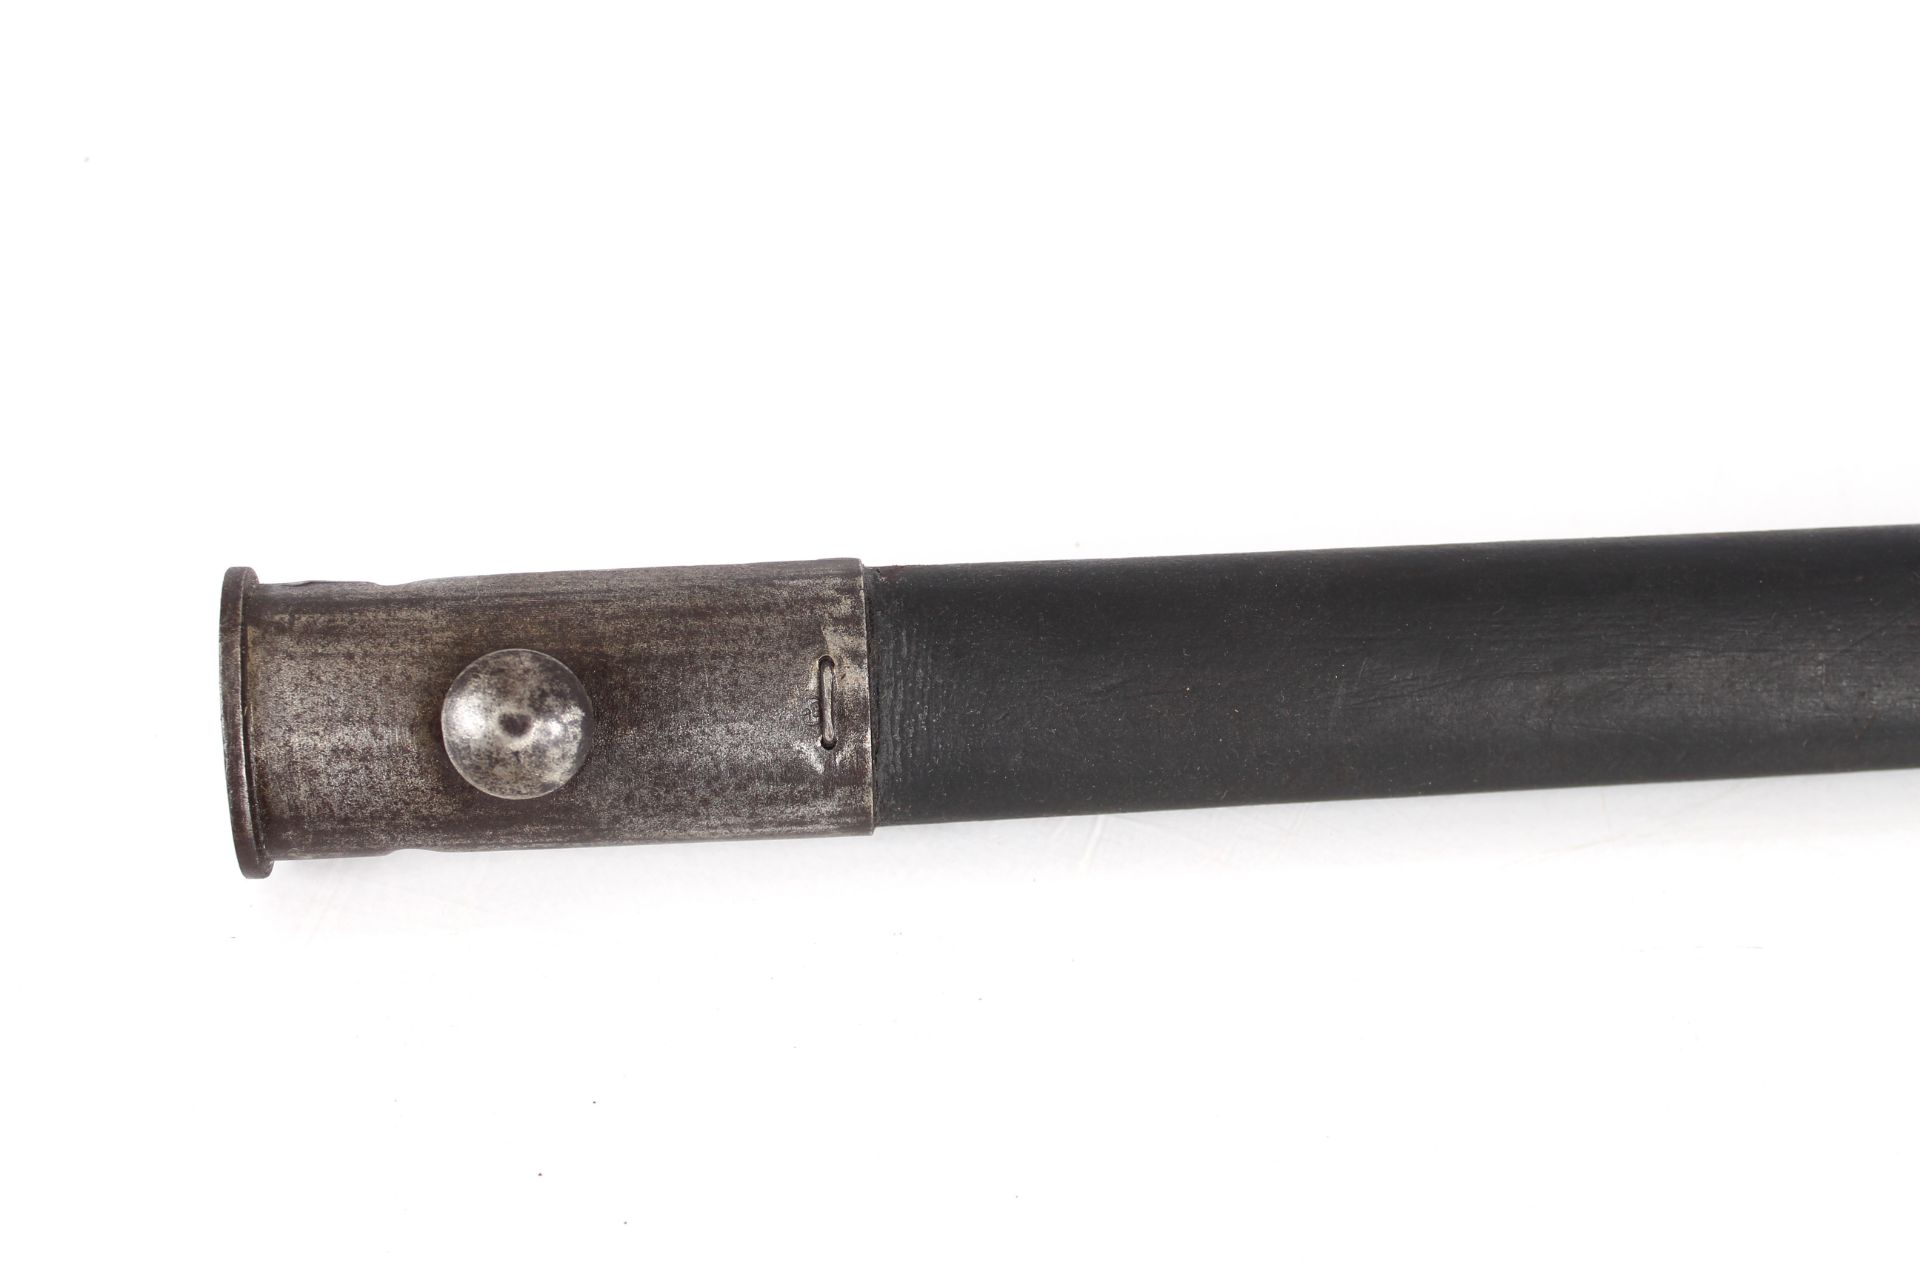 A British model 1907 bayonet with scabbard by Wilk - Image 11 of 14